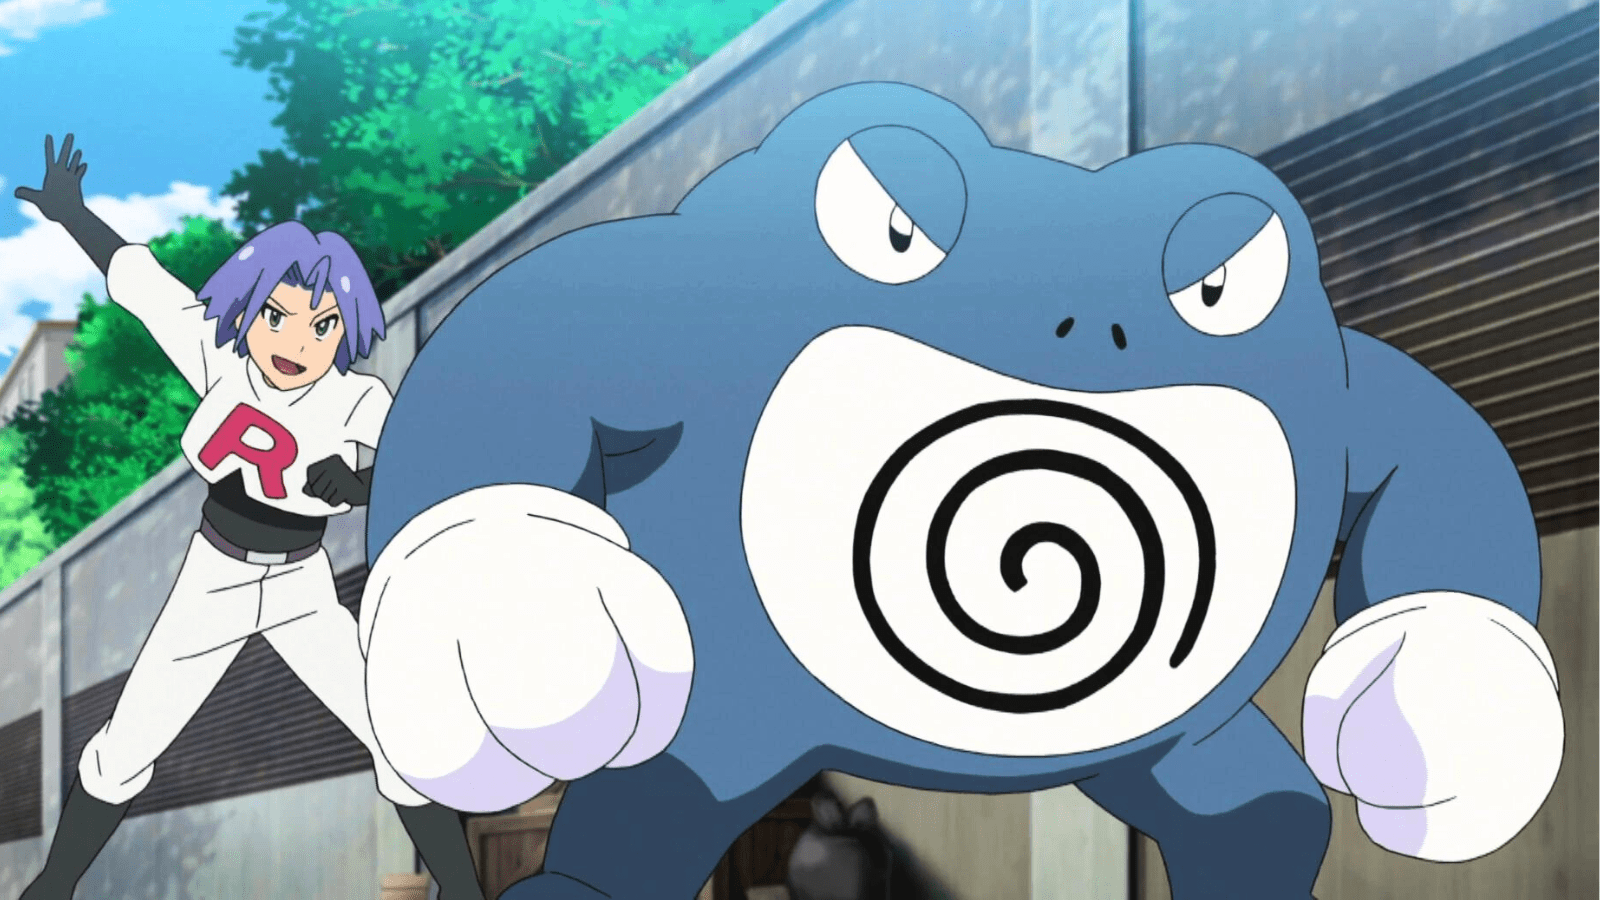 Poliwrath has key to easily beating Giovanni and Team Rocket in